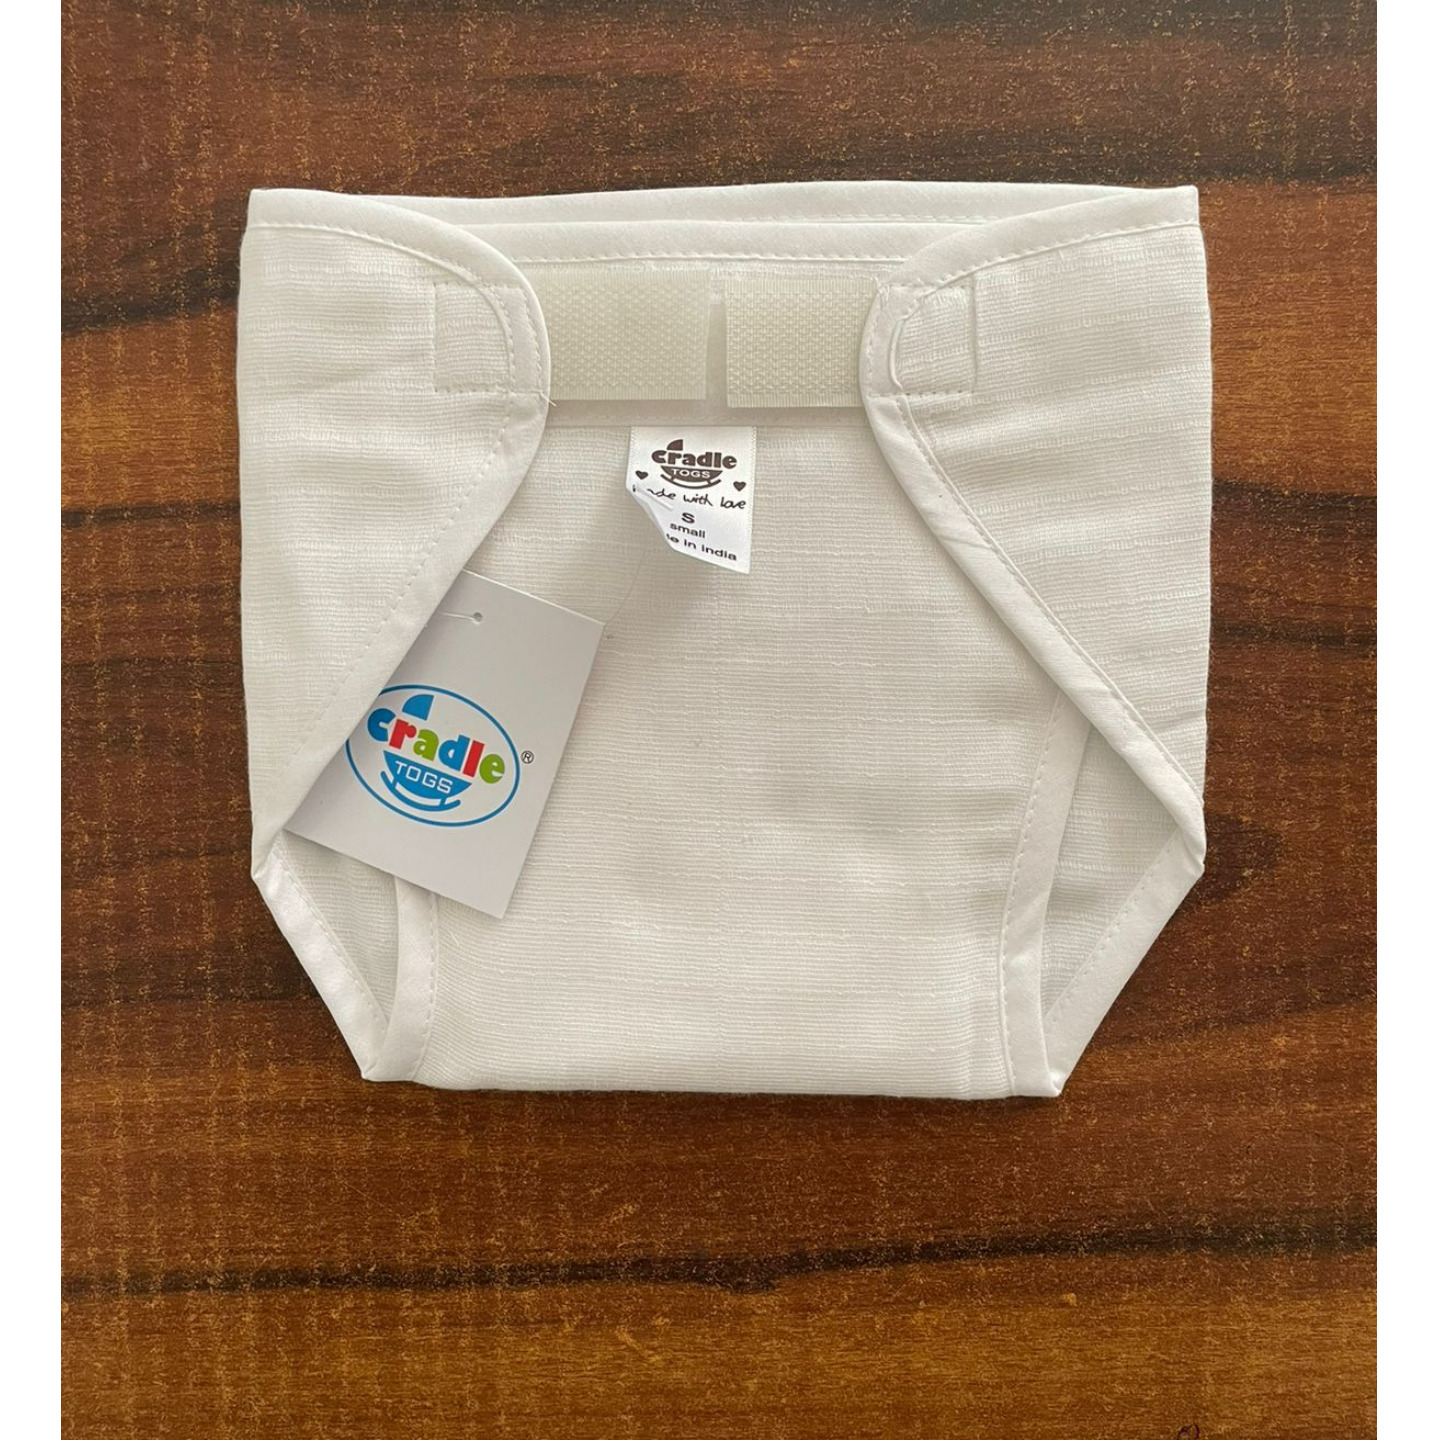 Cradle Togs NappiesLangot Rs 125 Only  Small Size